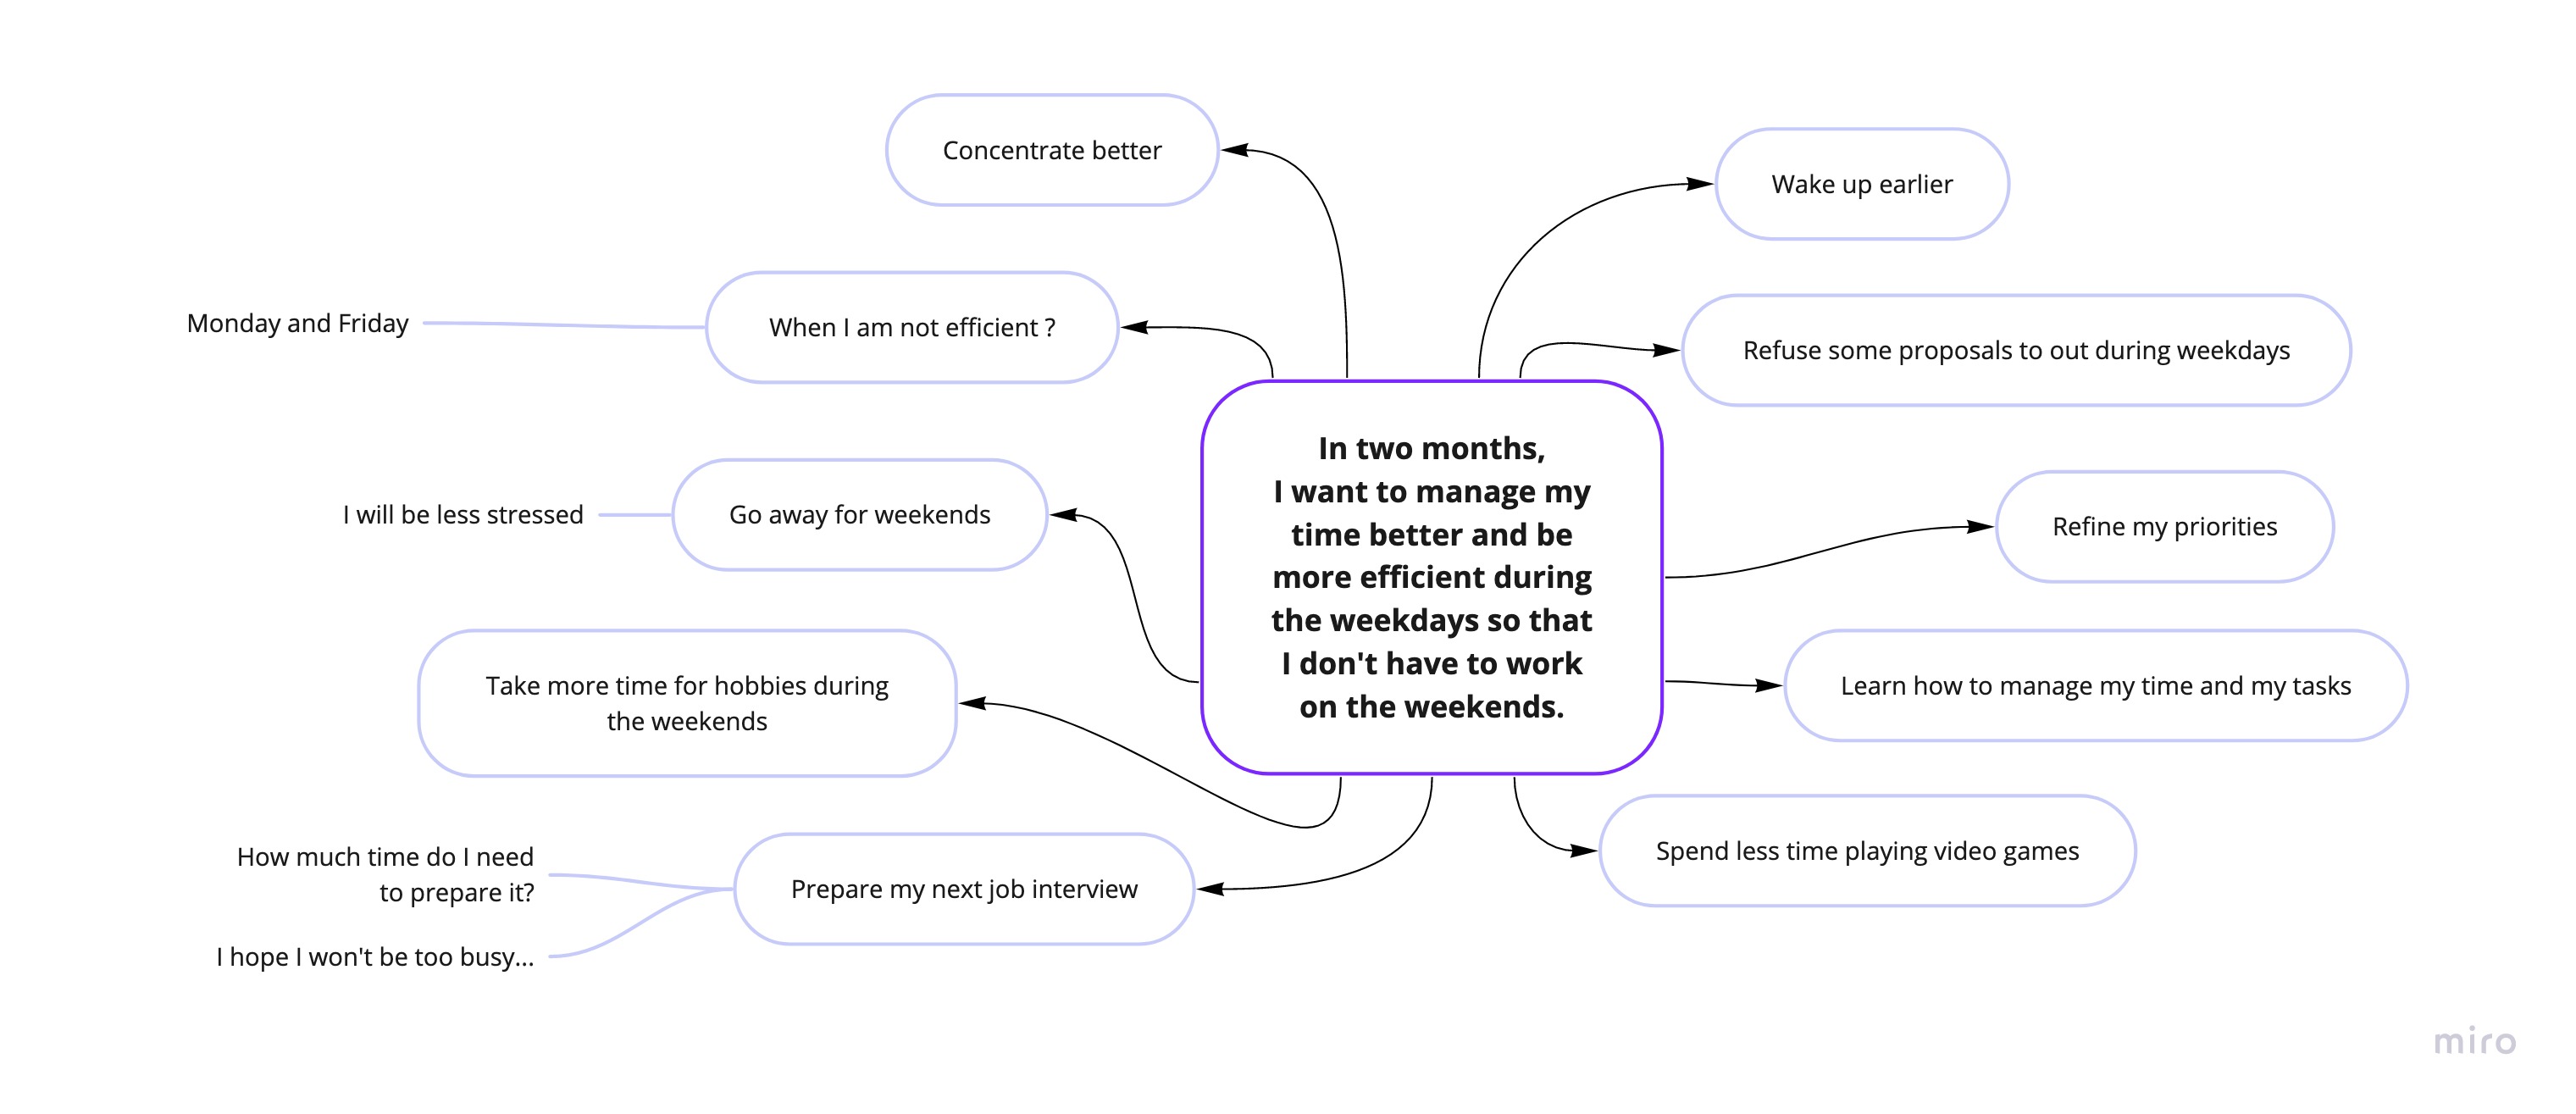 The goal is written at the mind map's center. Some thoughts are written. Examples: